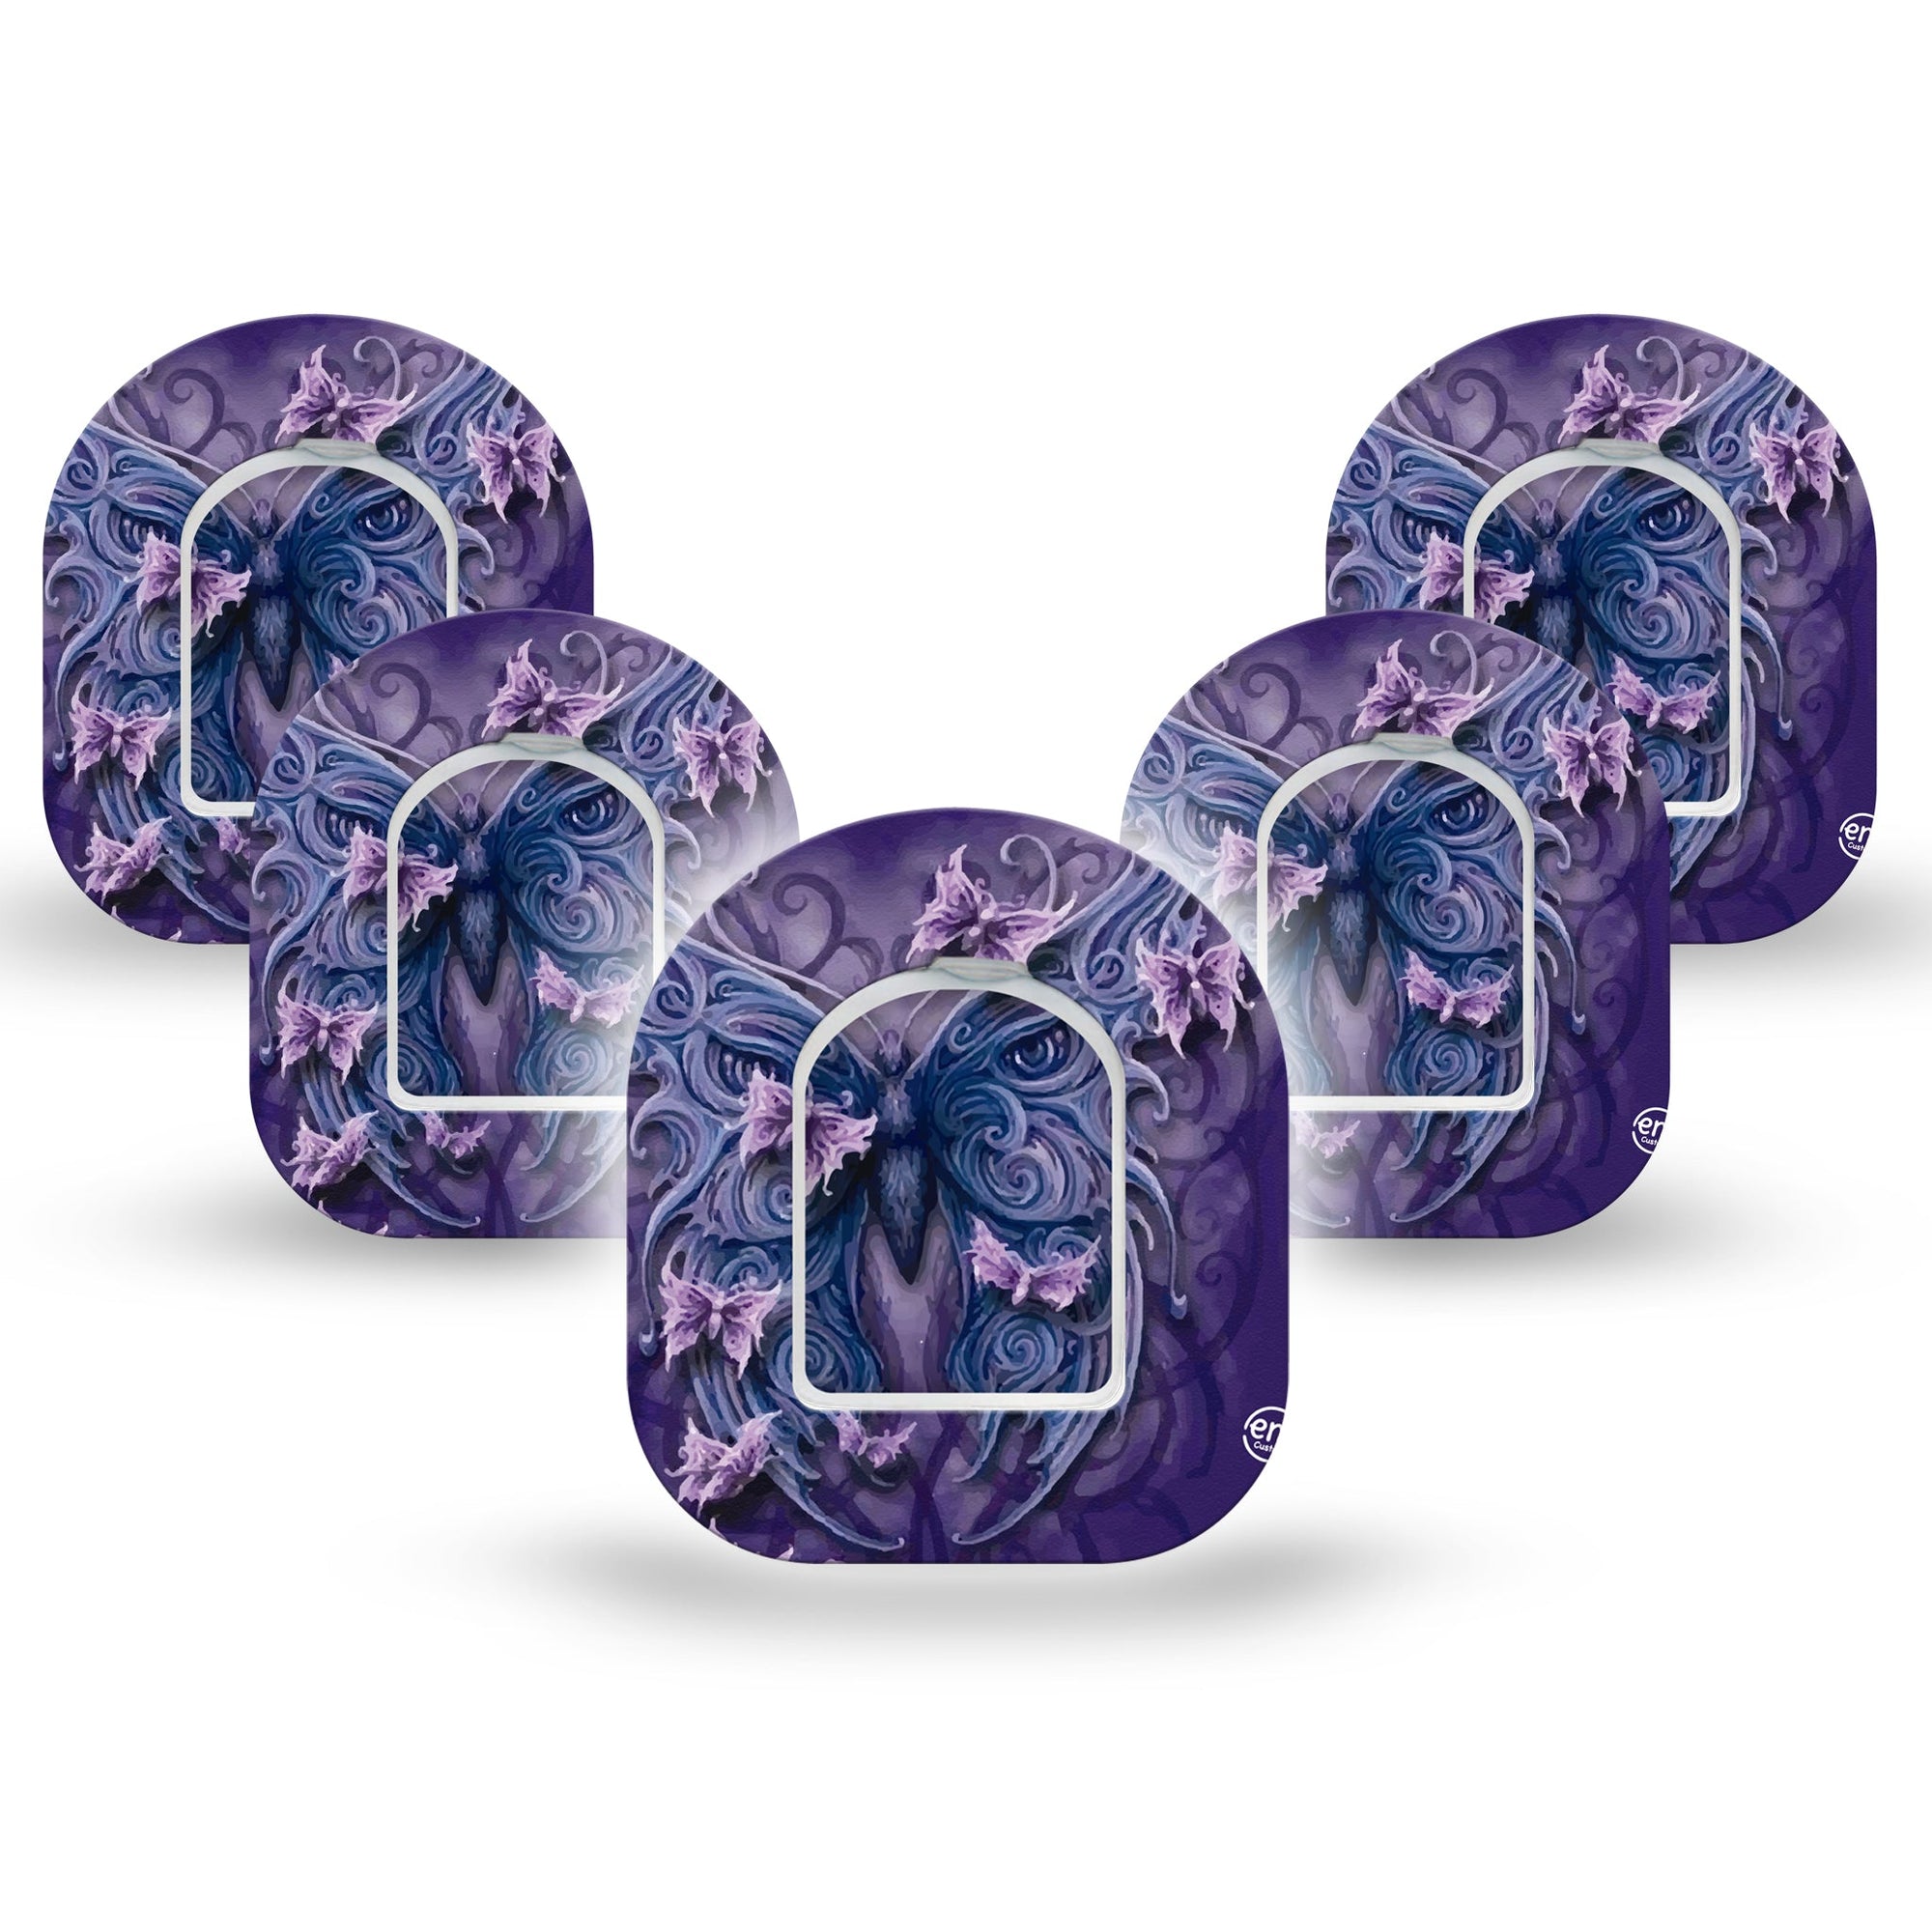 ExpressionMed Purple Butterfly Pod Mini Tape 5 Stickers and 5 Tapes, Regal Butterfly Overlay Tape Pump Design